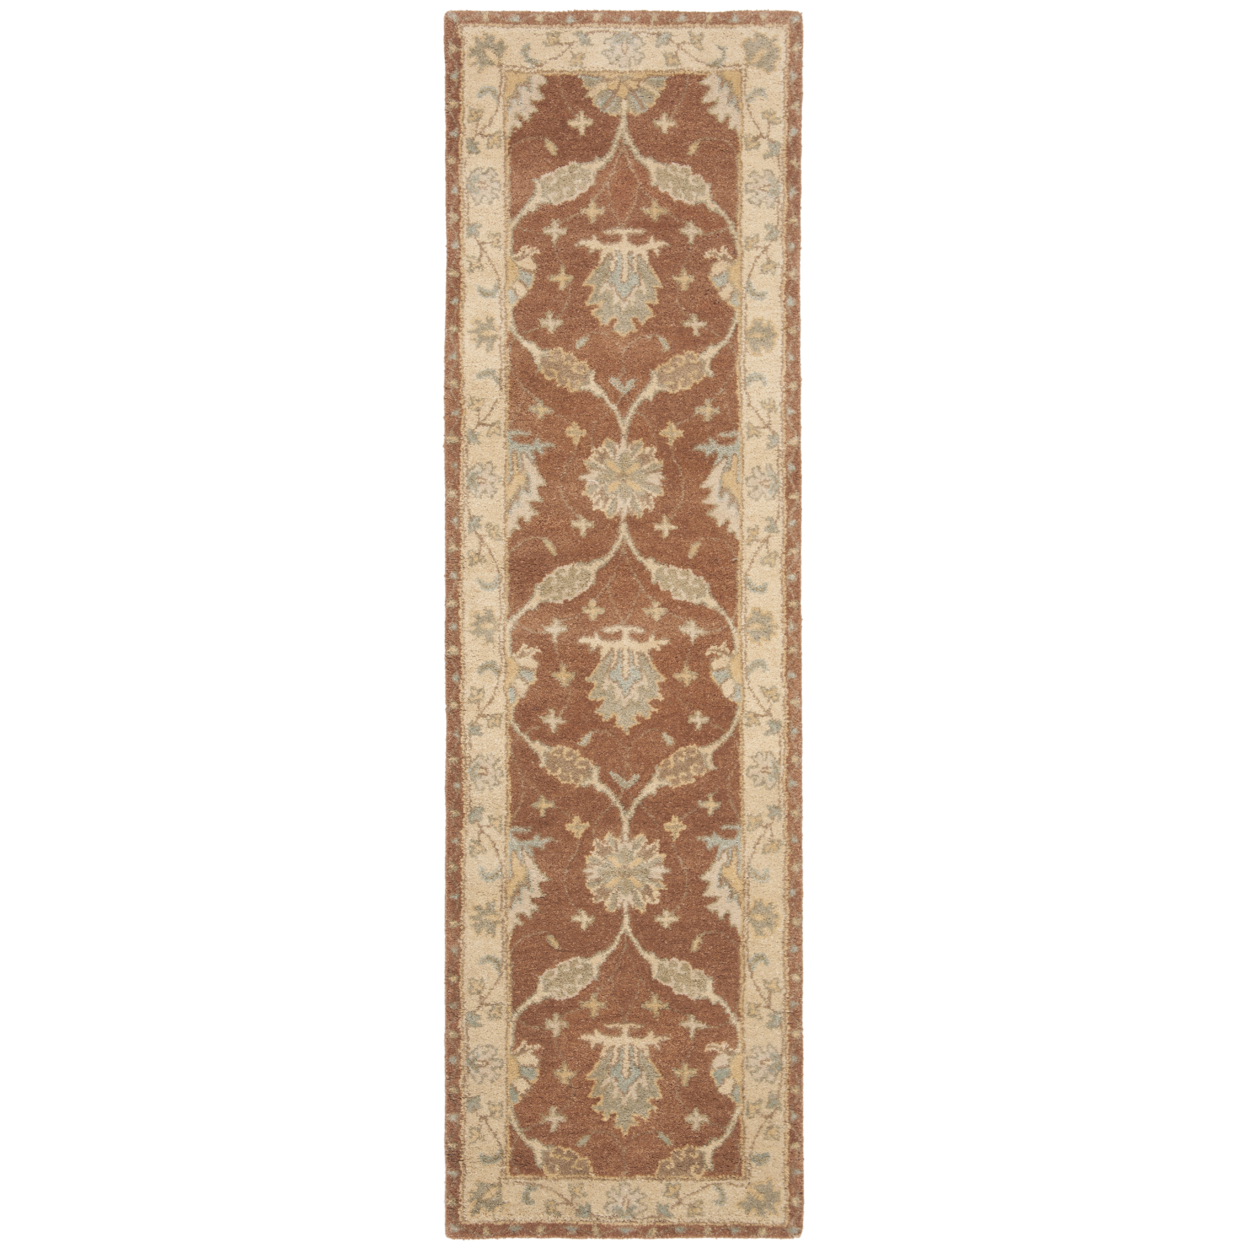 SAFAVIEH Antiquity AT315A Handmade Brown / Taupe Rug - 2' 3 X 14'